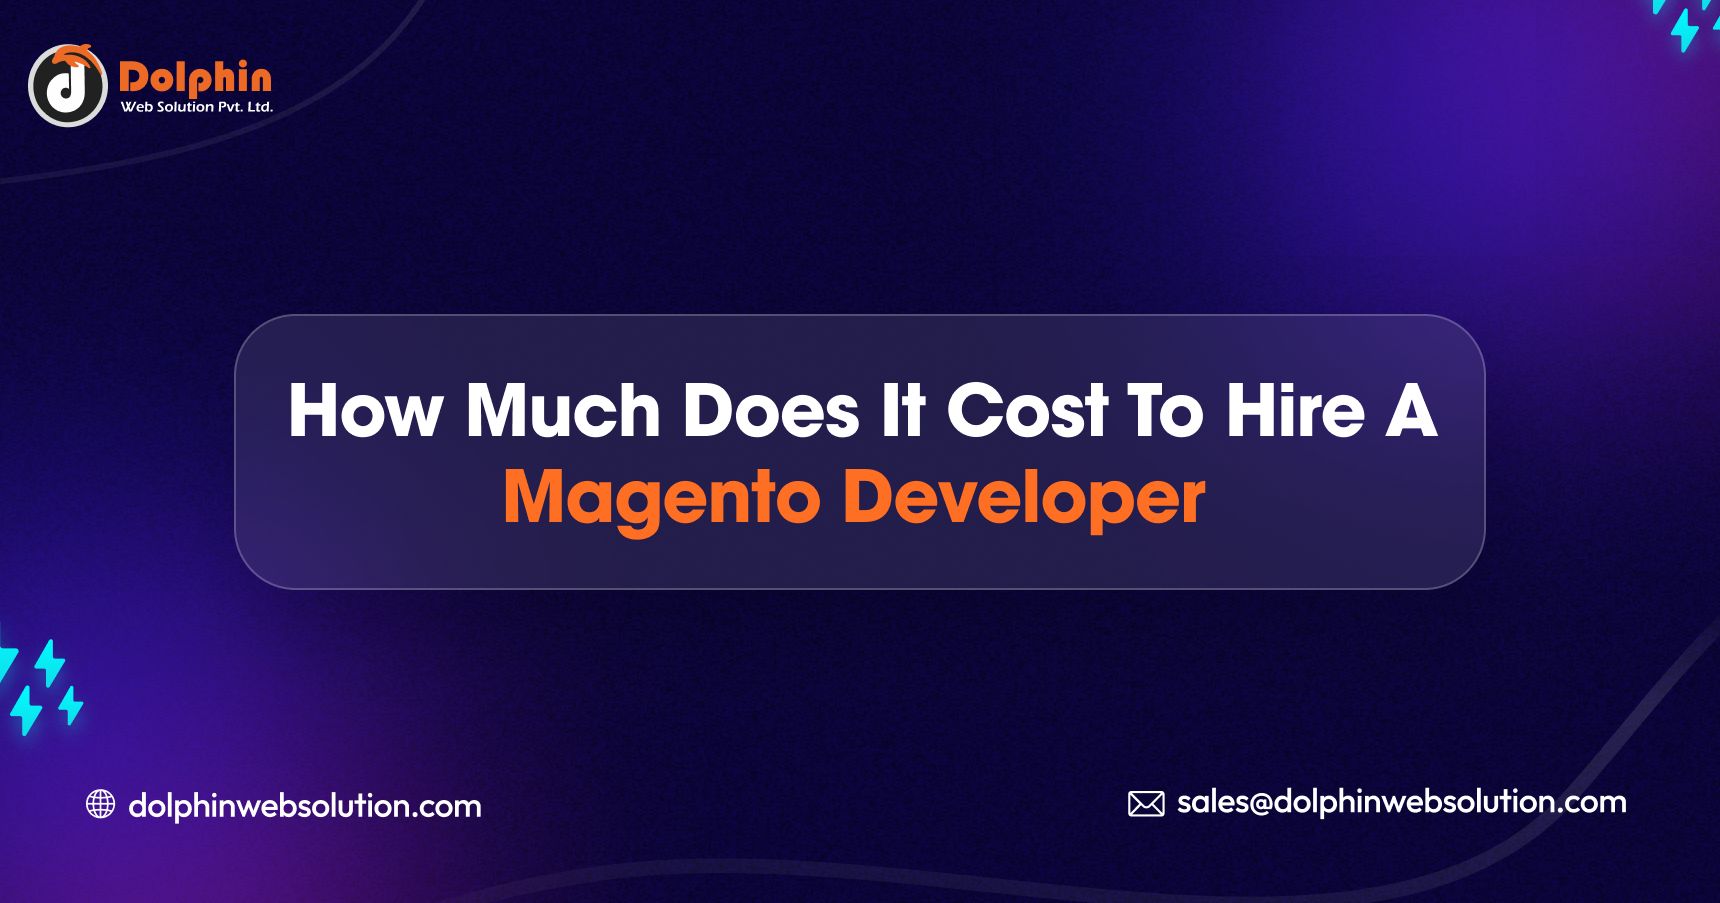 How Much Does It Cost To Hire A Magento Developer